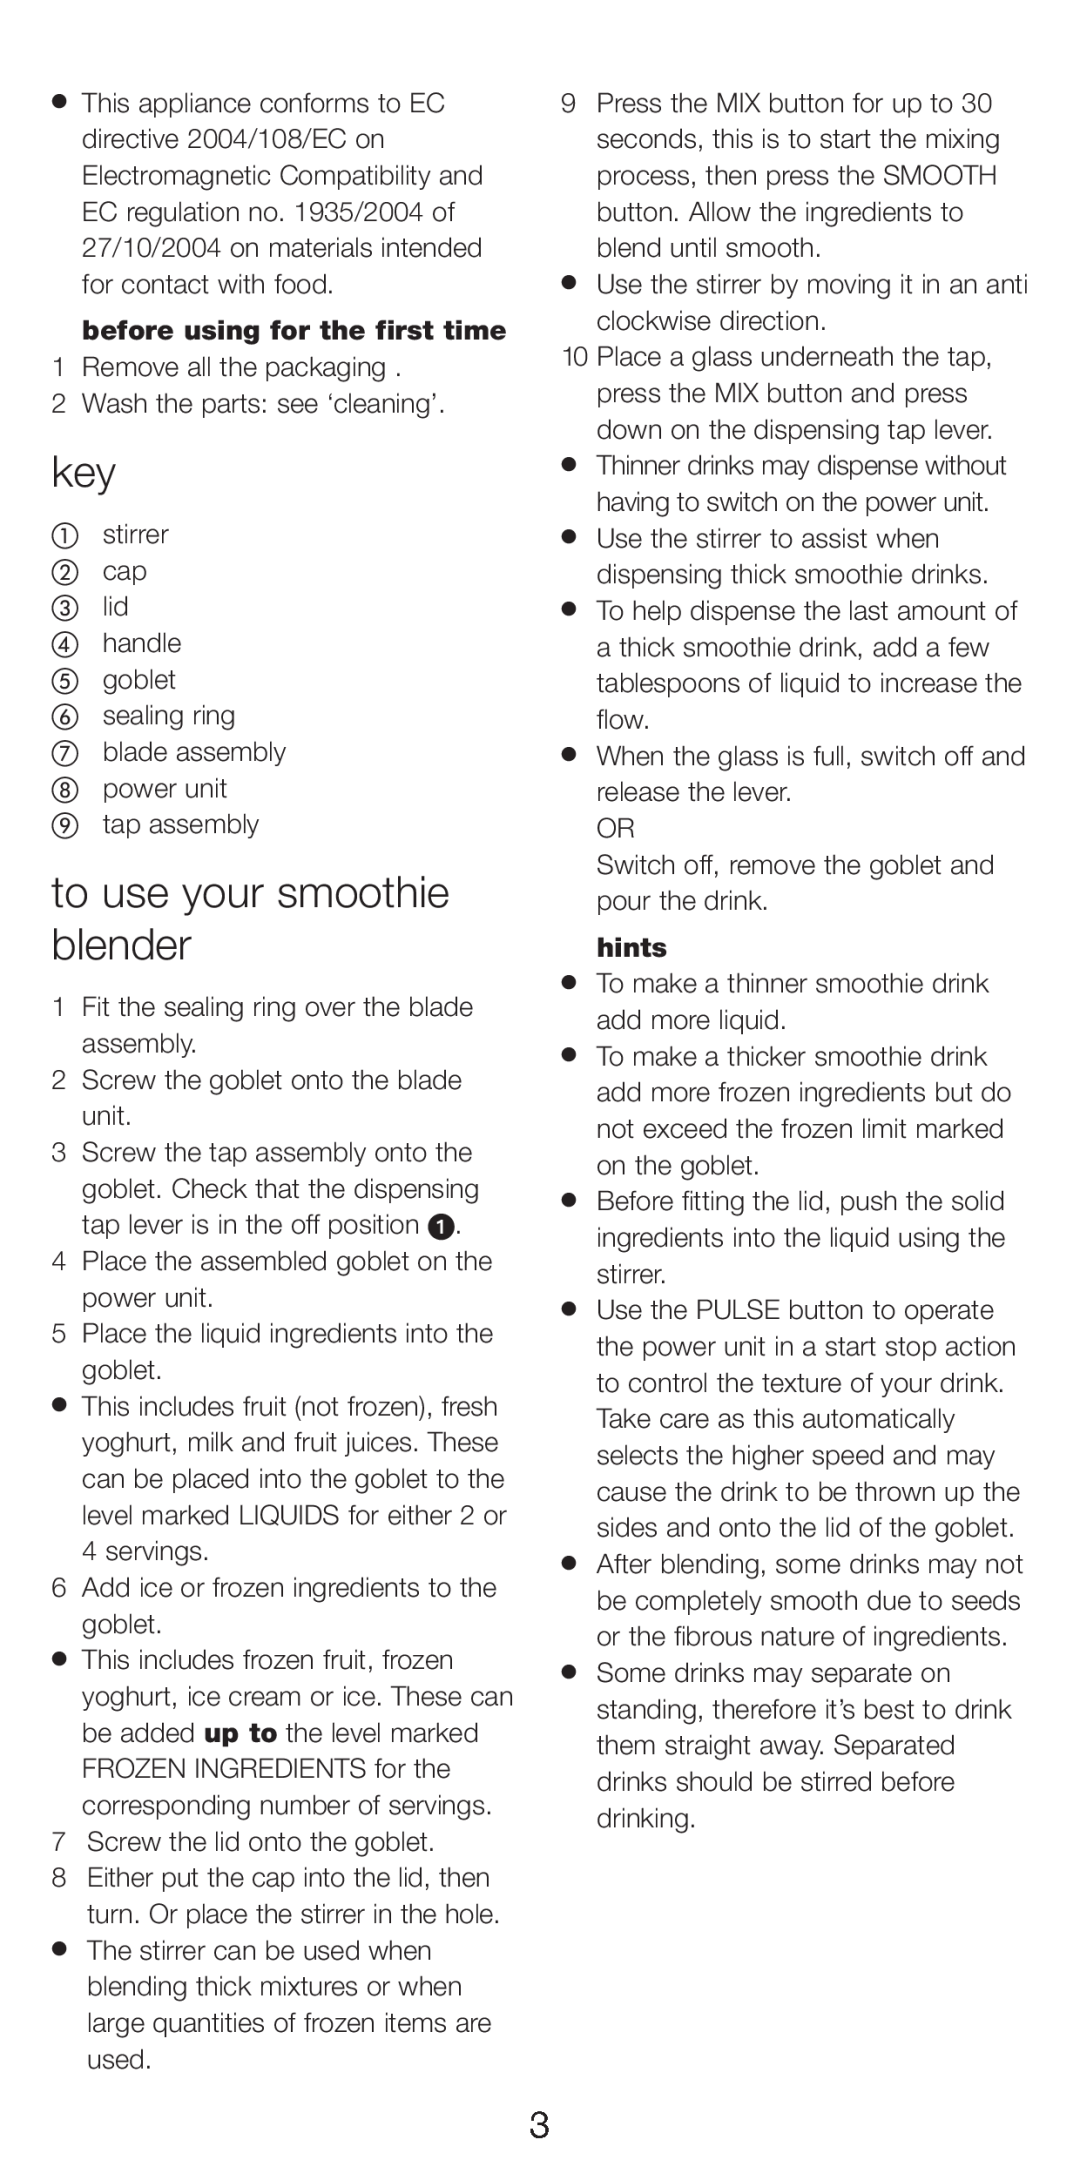 Kenwood SB250 manual to use your smoothie blender, before using for the first time, hints 